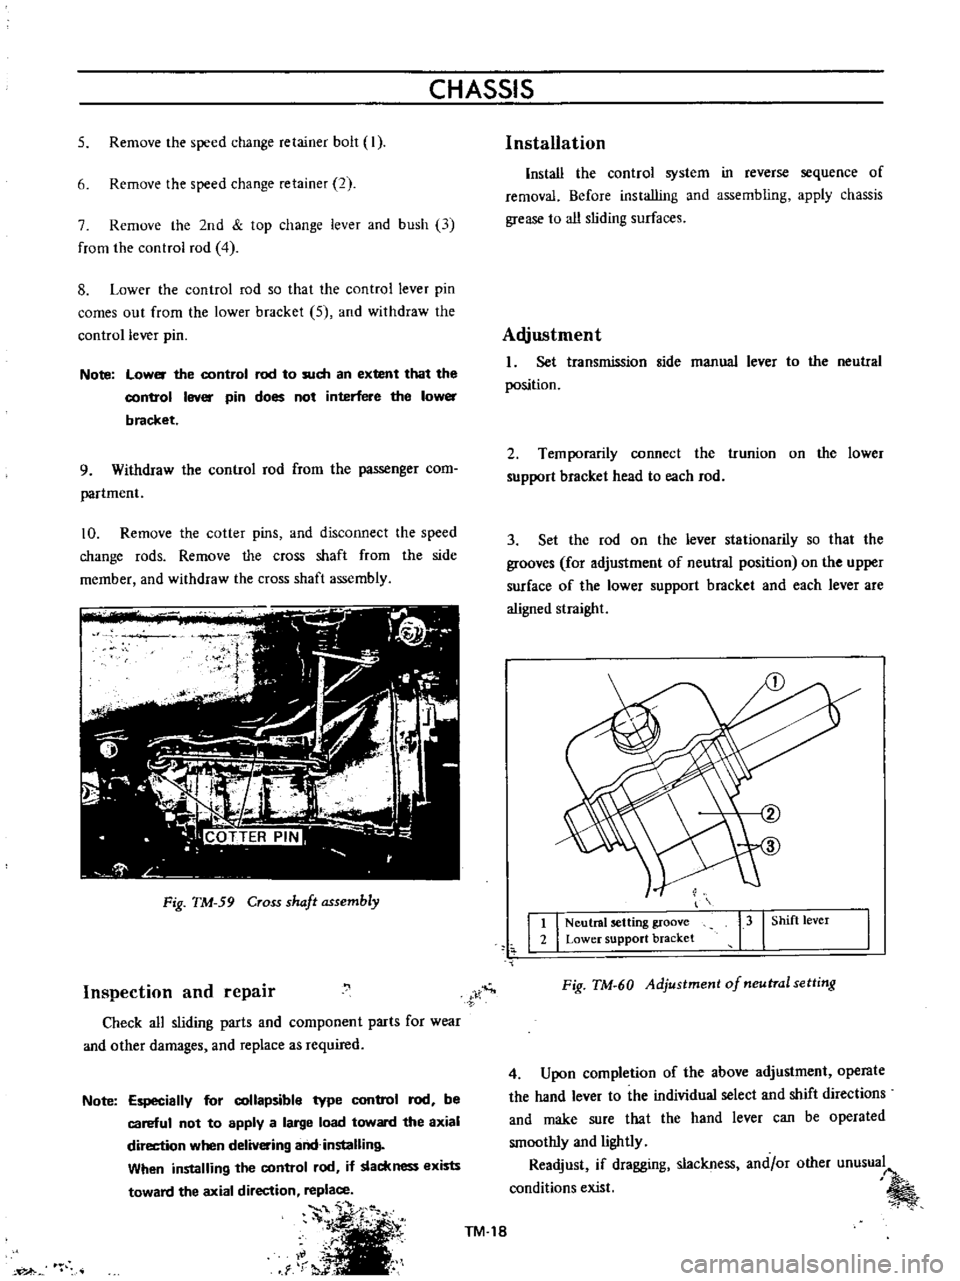 DATSUN B110 1973  Service Manual PDF 
CHASSIS

5 
Remove 
the

speed 
change 
retainer 
bolt

I

6 
Remove 
the

speed 
change 
retainer 
2

7 
Remove 
the 
2nd

top 
change 
lever 
and 
bush

13

from 
the 
control 
rod 
4

8 
Lower 
th